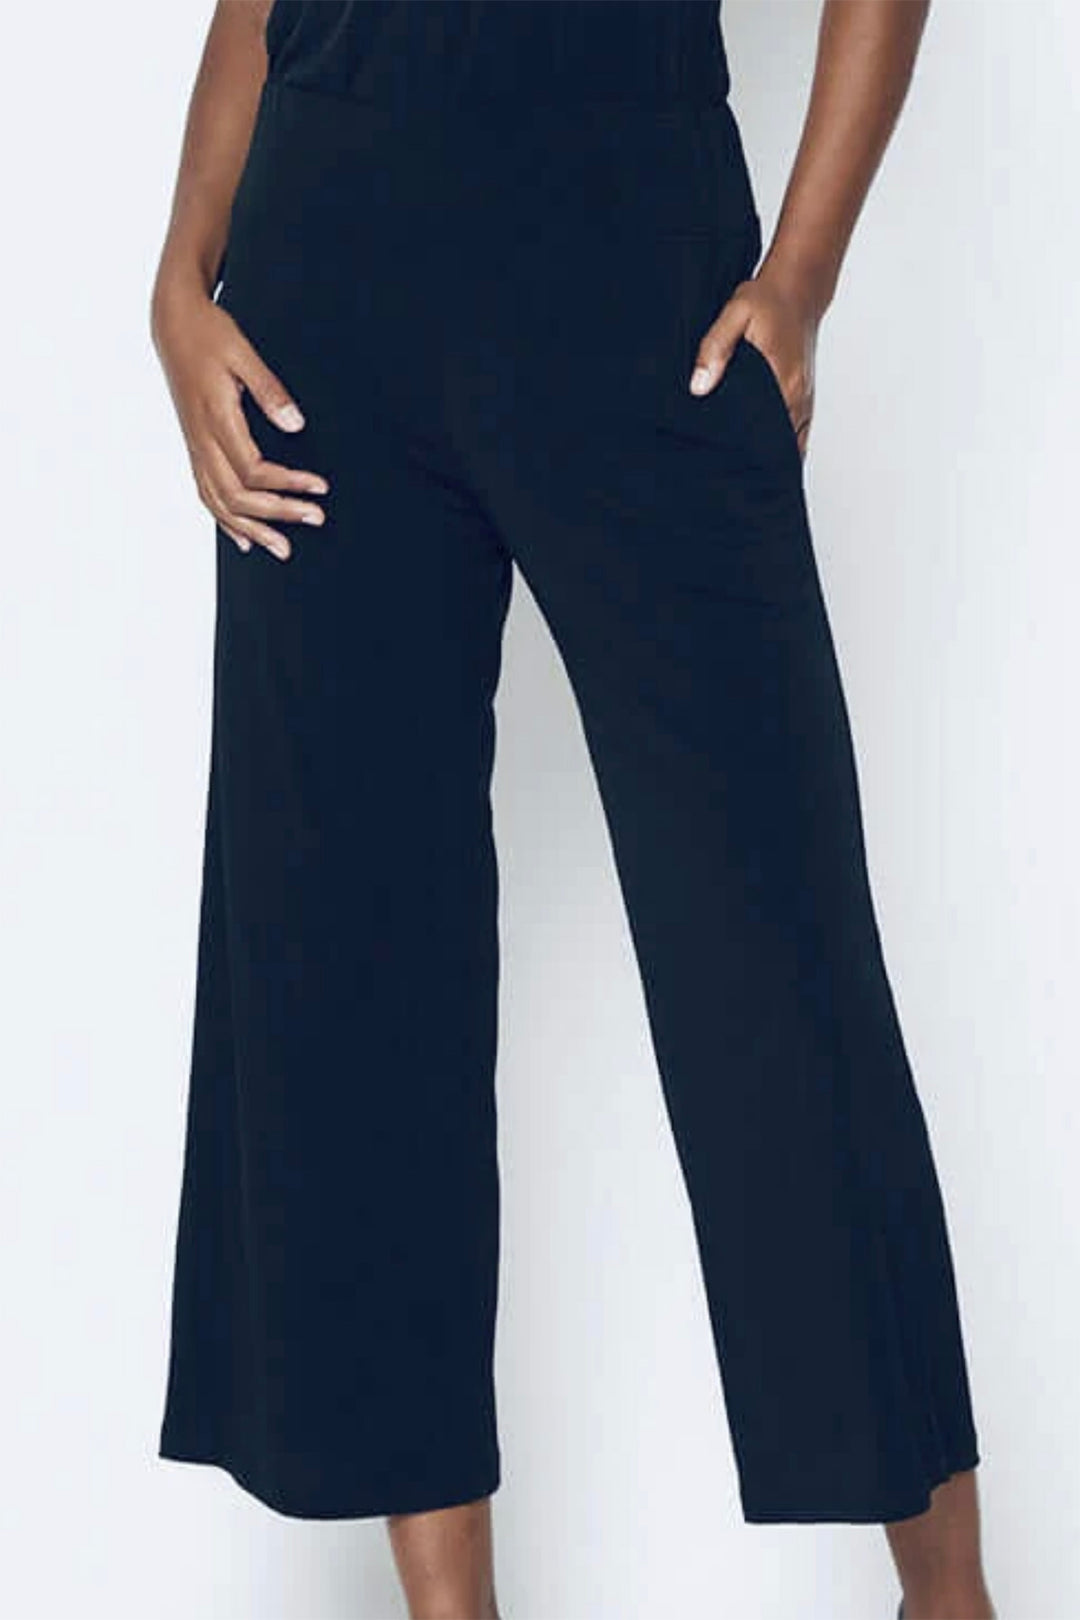 Lundie culottes in ink by Philosophy, sold and shipped from Pizazz Boutique online women's clothes shops Australia